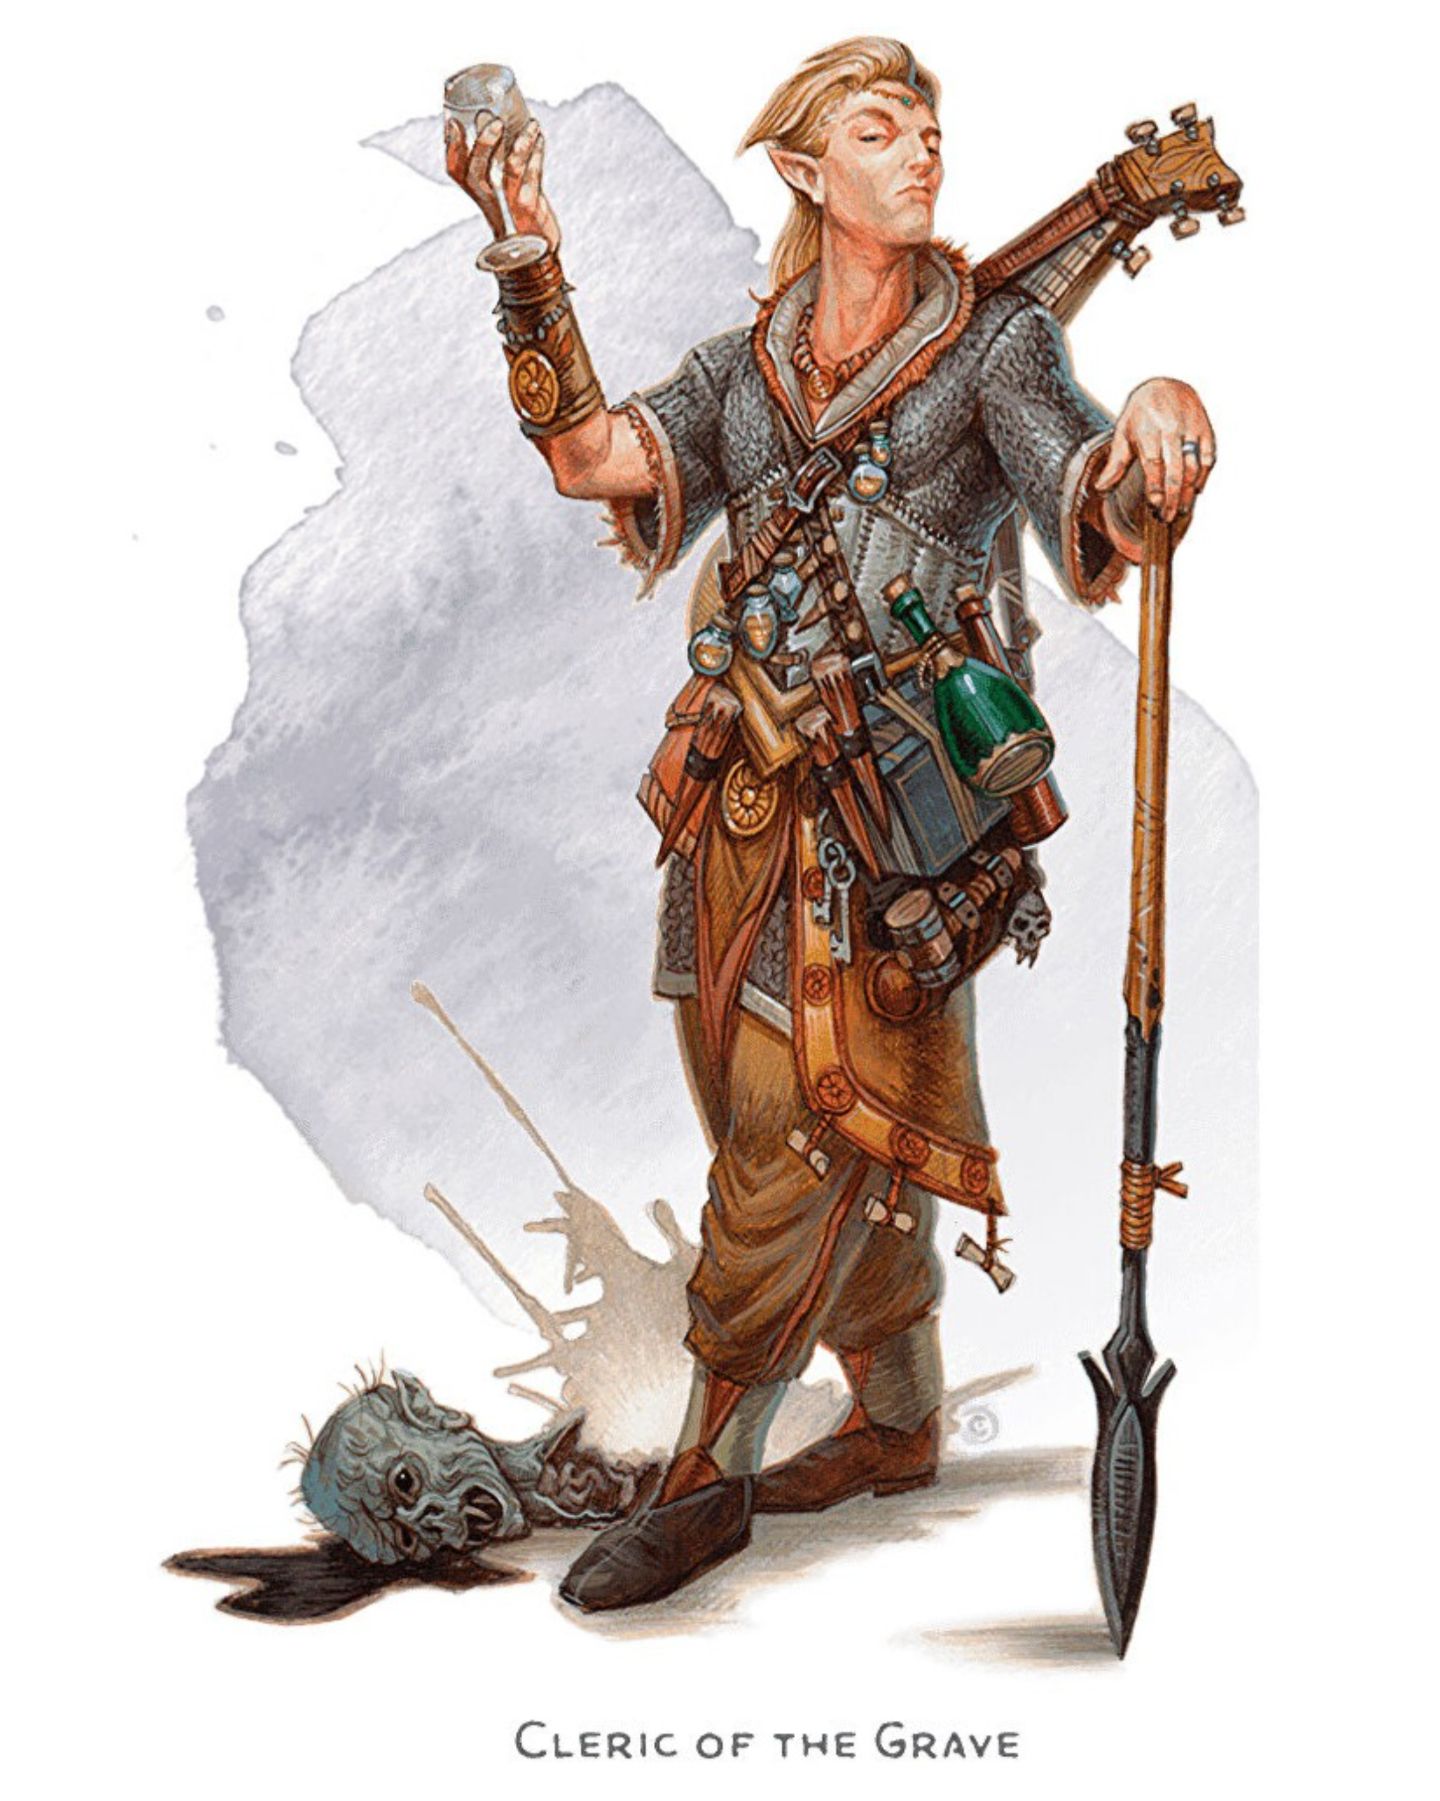 Cleric of the Grave via Wizards of the Coast